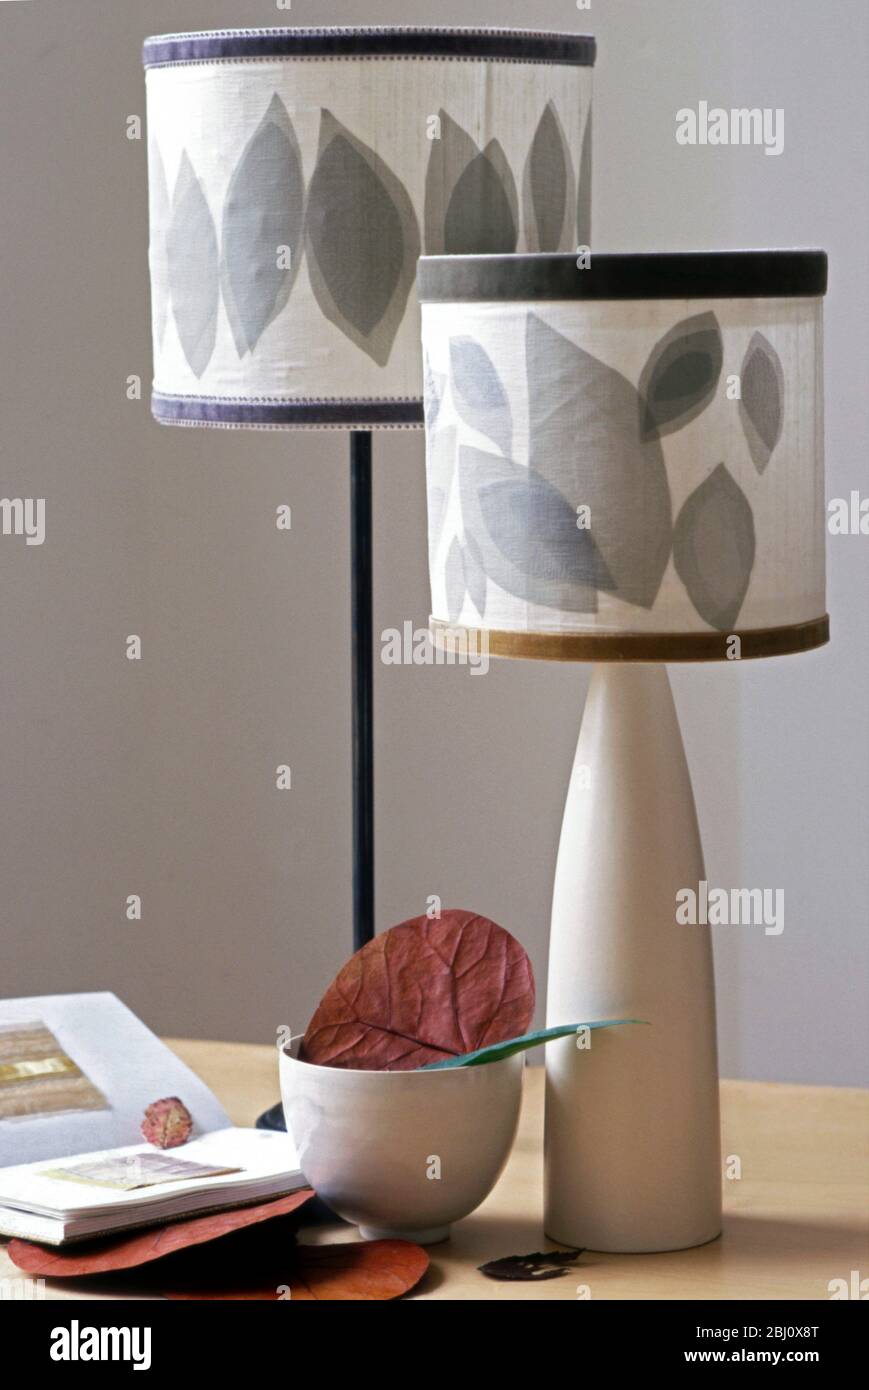 Modern lamps with shades made from layers of different coloured organza cut into leaf shapes in interior setting - Stock Photo